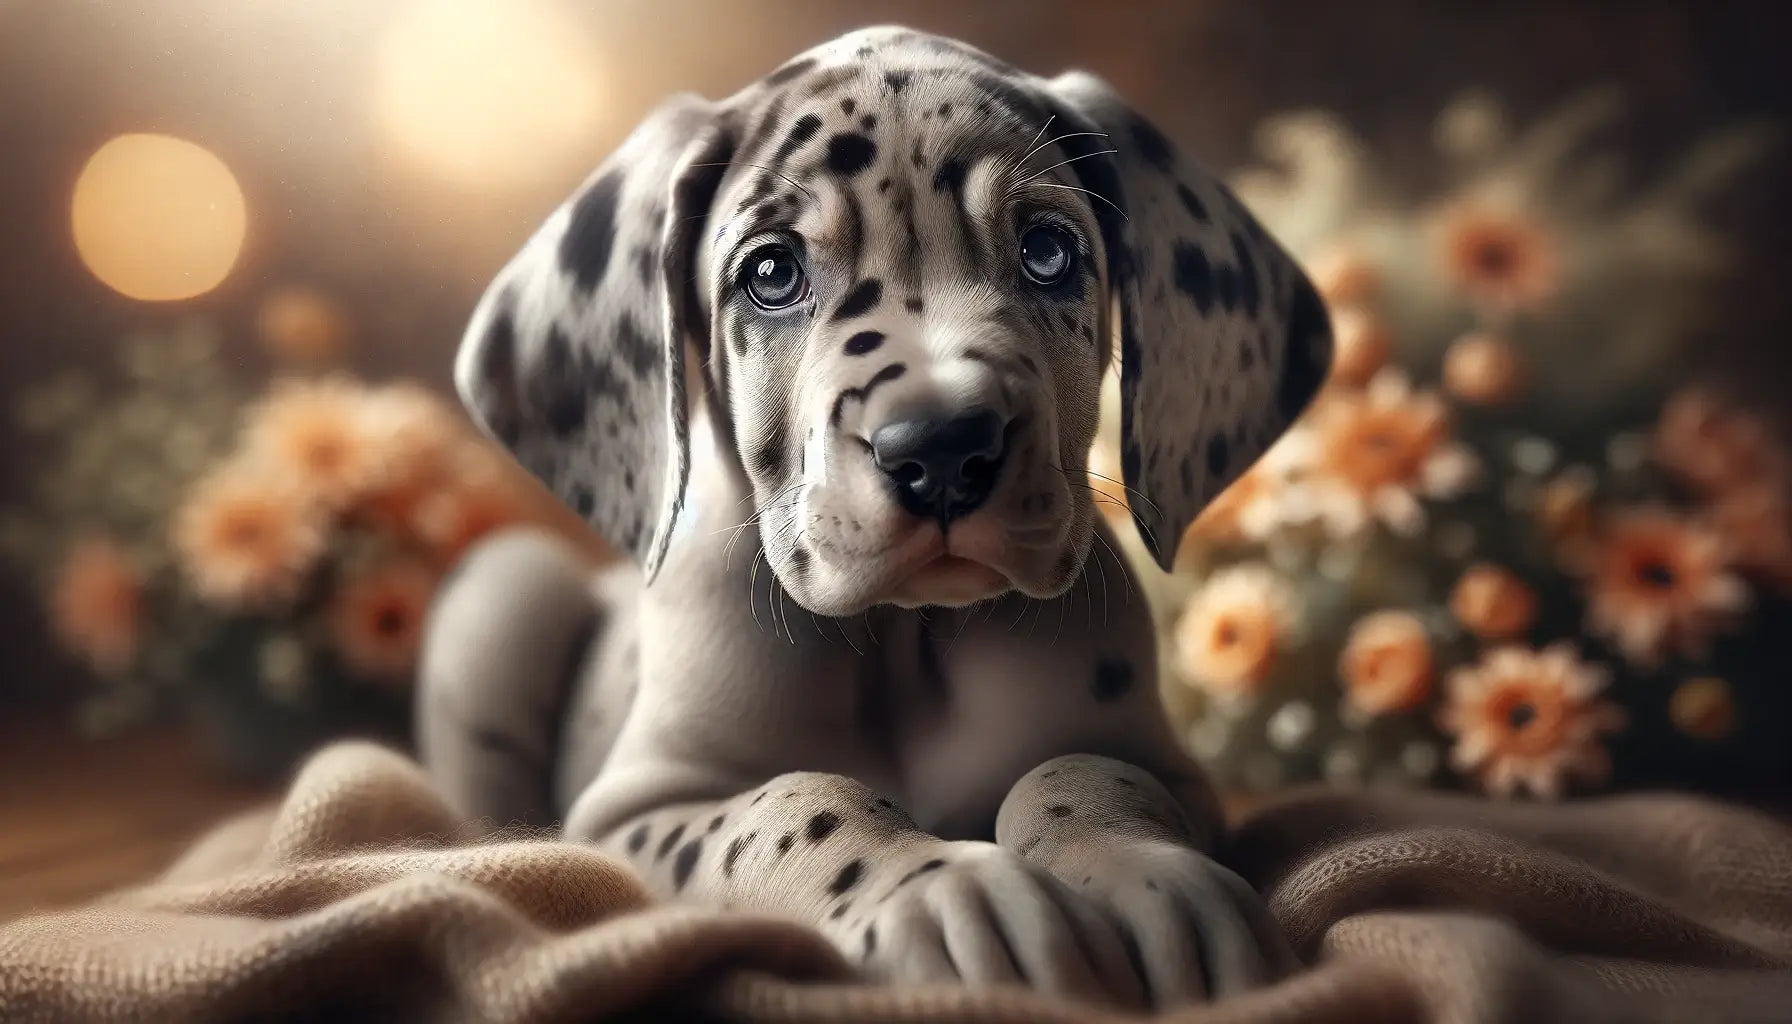 A Merle Great Dane puppy with youthful features, including its small size, floppy ears, and adorable puppy eyes.